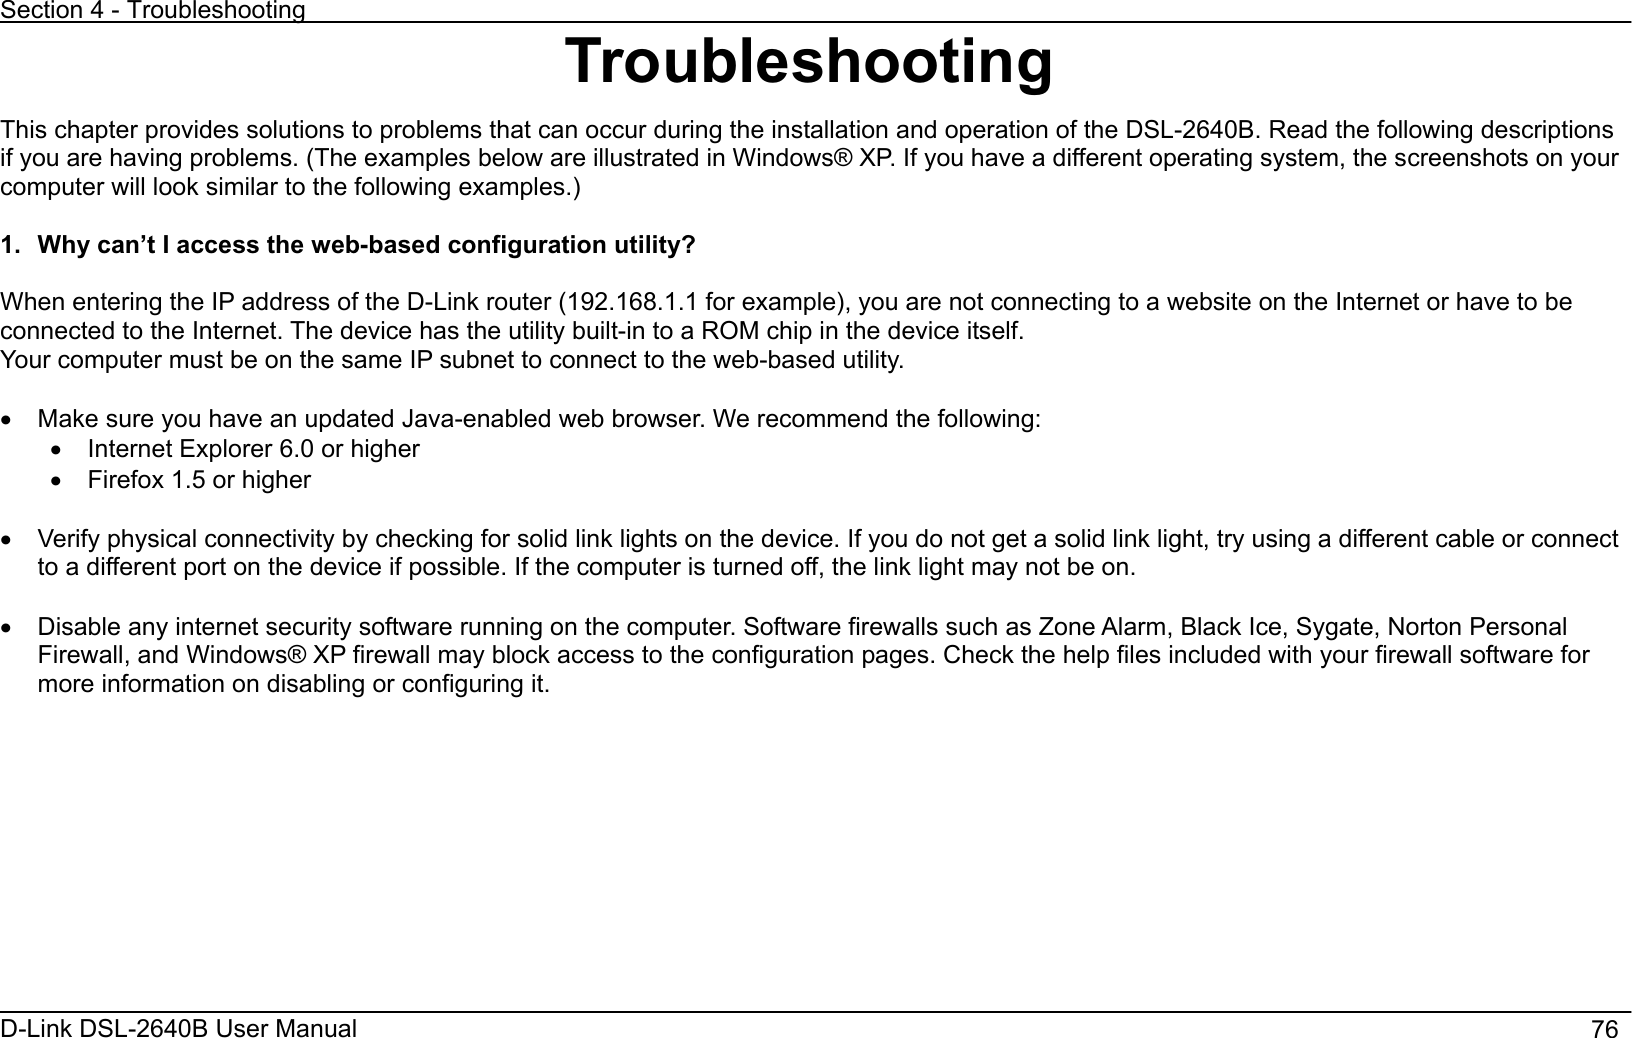 Section 4 - Troubleshooting D-Link DSL-2640B User Manual                                       76Troubleshooting This chapter provides solutions to problems that can occur during the installation and operation of the DSL-2640B. Read the following descriptions if you are having problems. (The examples below are illustrated in Windows® XP. If you have a different operating system, the screenshots on your computer will look similar to the following examples.)   1.  Why can’t I access the web-based configuration utility? When entering the IP address of the D-Link router (192.168.1.1 for example), you are not connecting to a website on the Internet or have to be connected to the Internet. The device has the utility built-in to a ROM chip in the device itself.   Your computer must be on the same IP subnet to connect to the web-based utility. x  Make sure you have an updated Java-enabled web browser. We recommend the following: x  Internet Explorer 6.0 or higher x  Firefox 1.5 or higher x  Verify physical connectivity by checking for solid link lights on the device. If you do not get a solid link light, try using a different cable or connect to a different port on the device if possible. If the computer is turned off, the link light may not be on. x  Disable any internet security software running on the computer. Software firewalls such as Zone Alarm, Black Ice, Sygate, Norton Personal Firewall, and Windows® XP firewall may block access to the configuration pages. Check the help files included with your firewall software for more information on disabling or configuring it.   